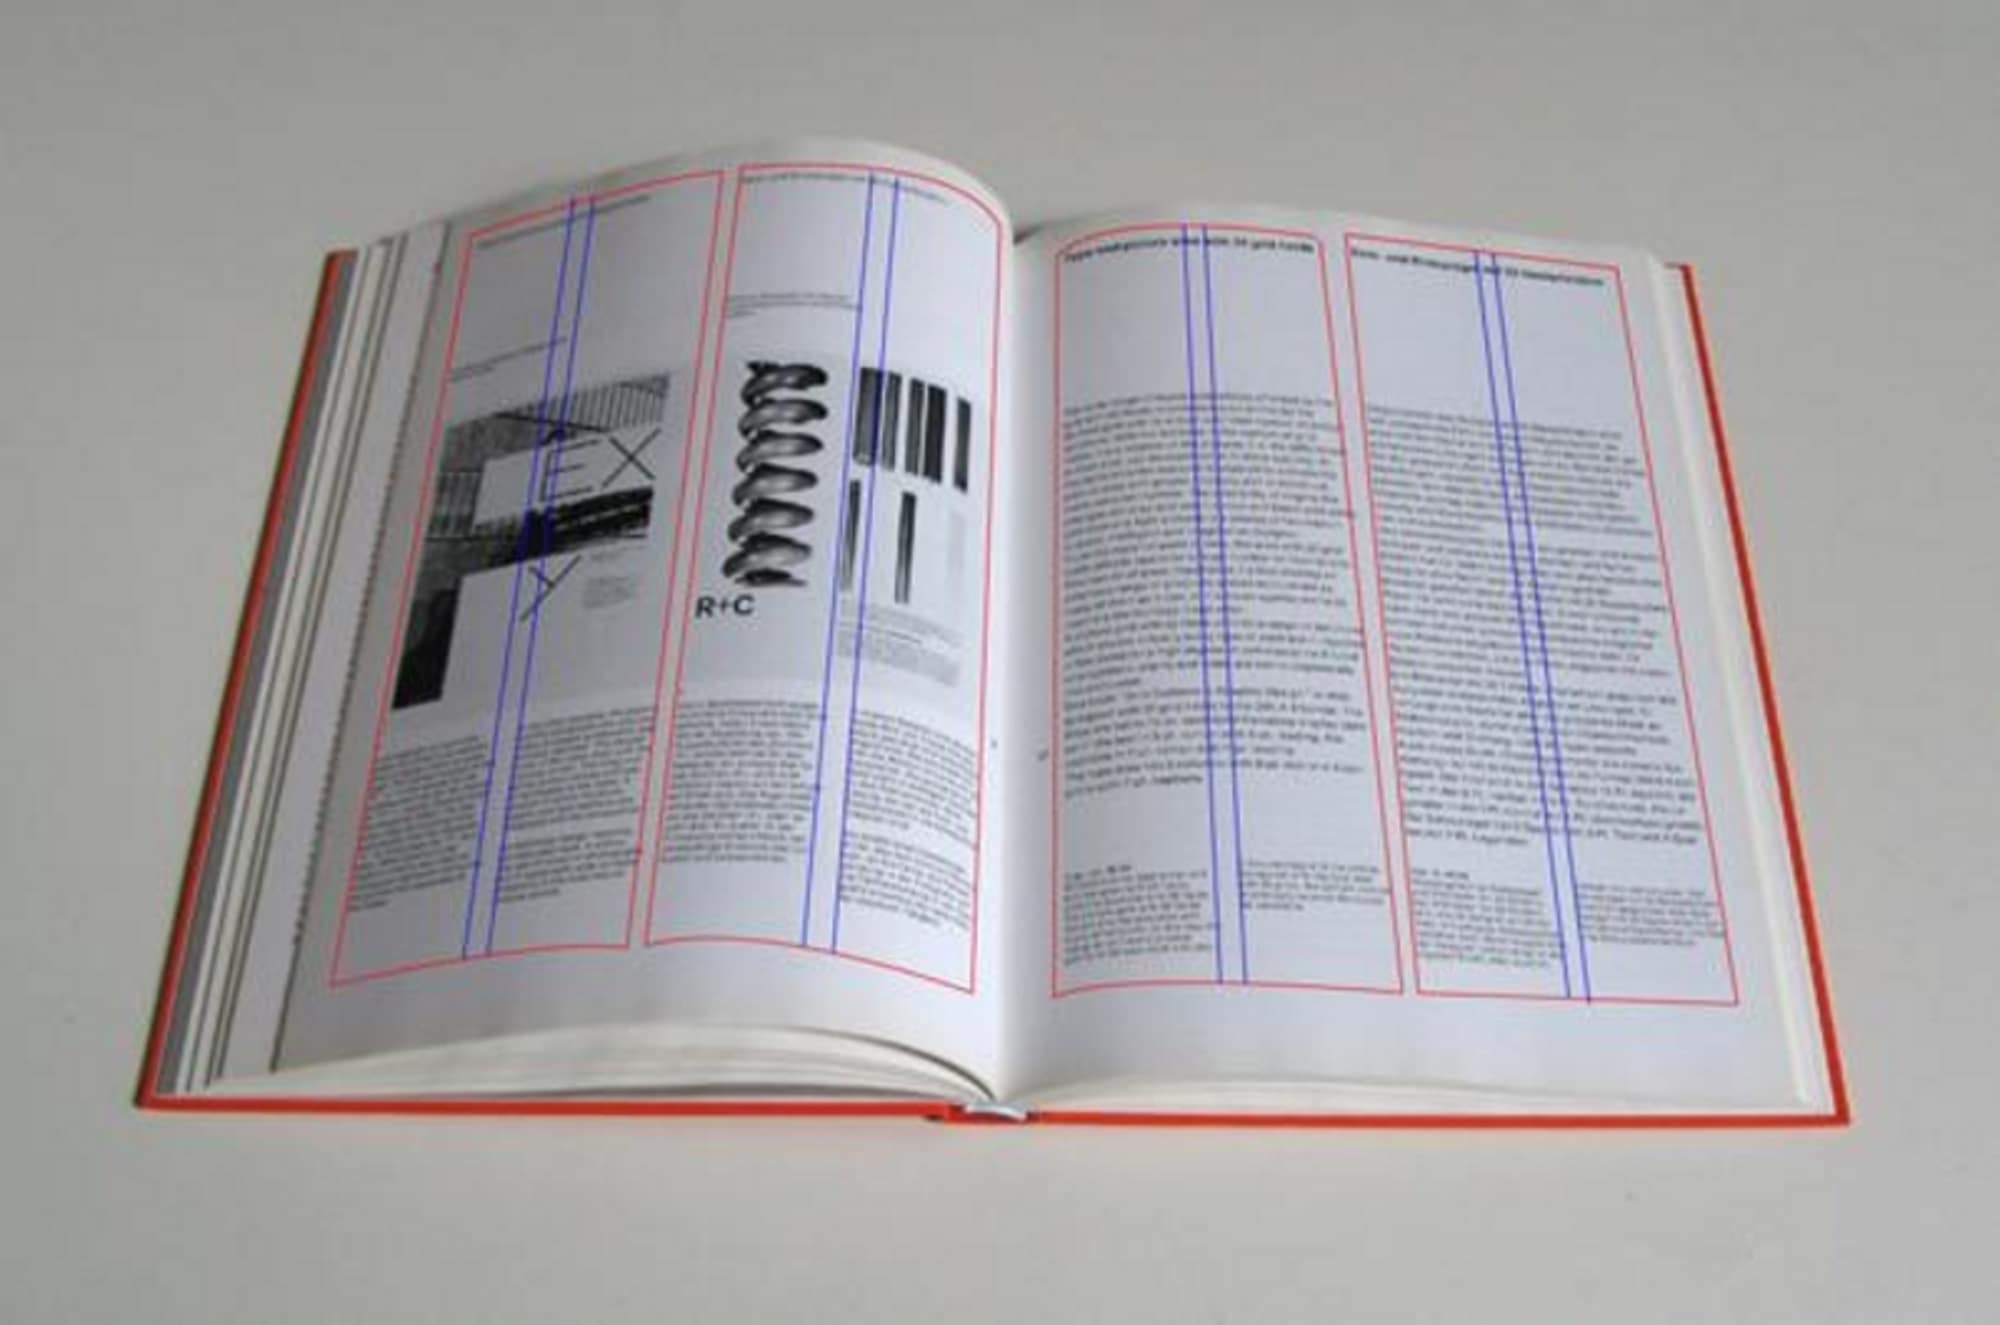 Image shows a grid on a book illustrating the pages and how it makes it easier for people to read